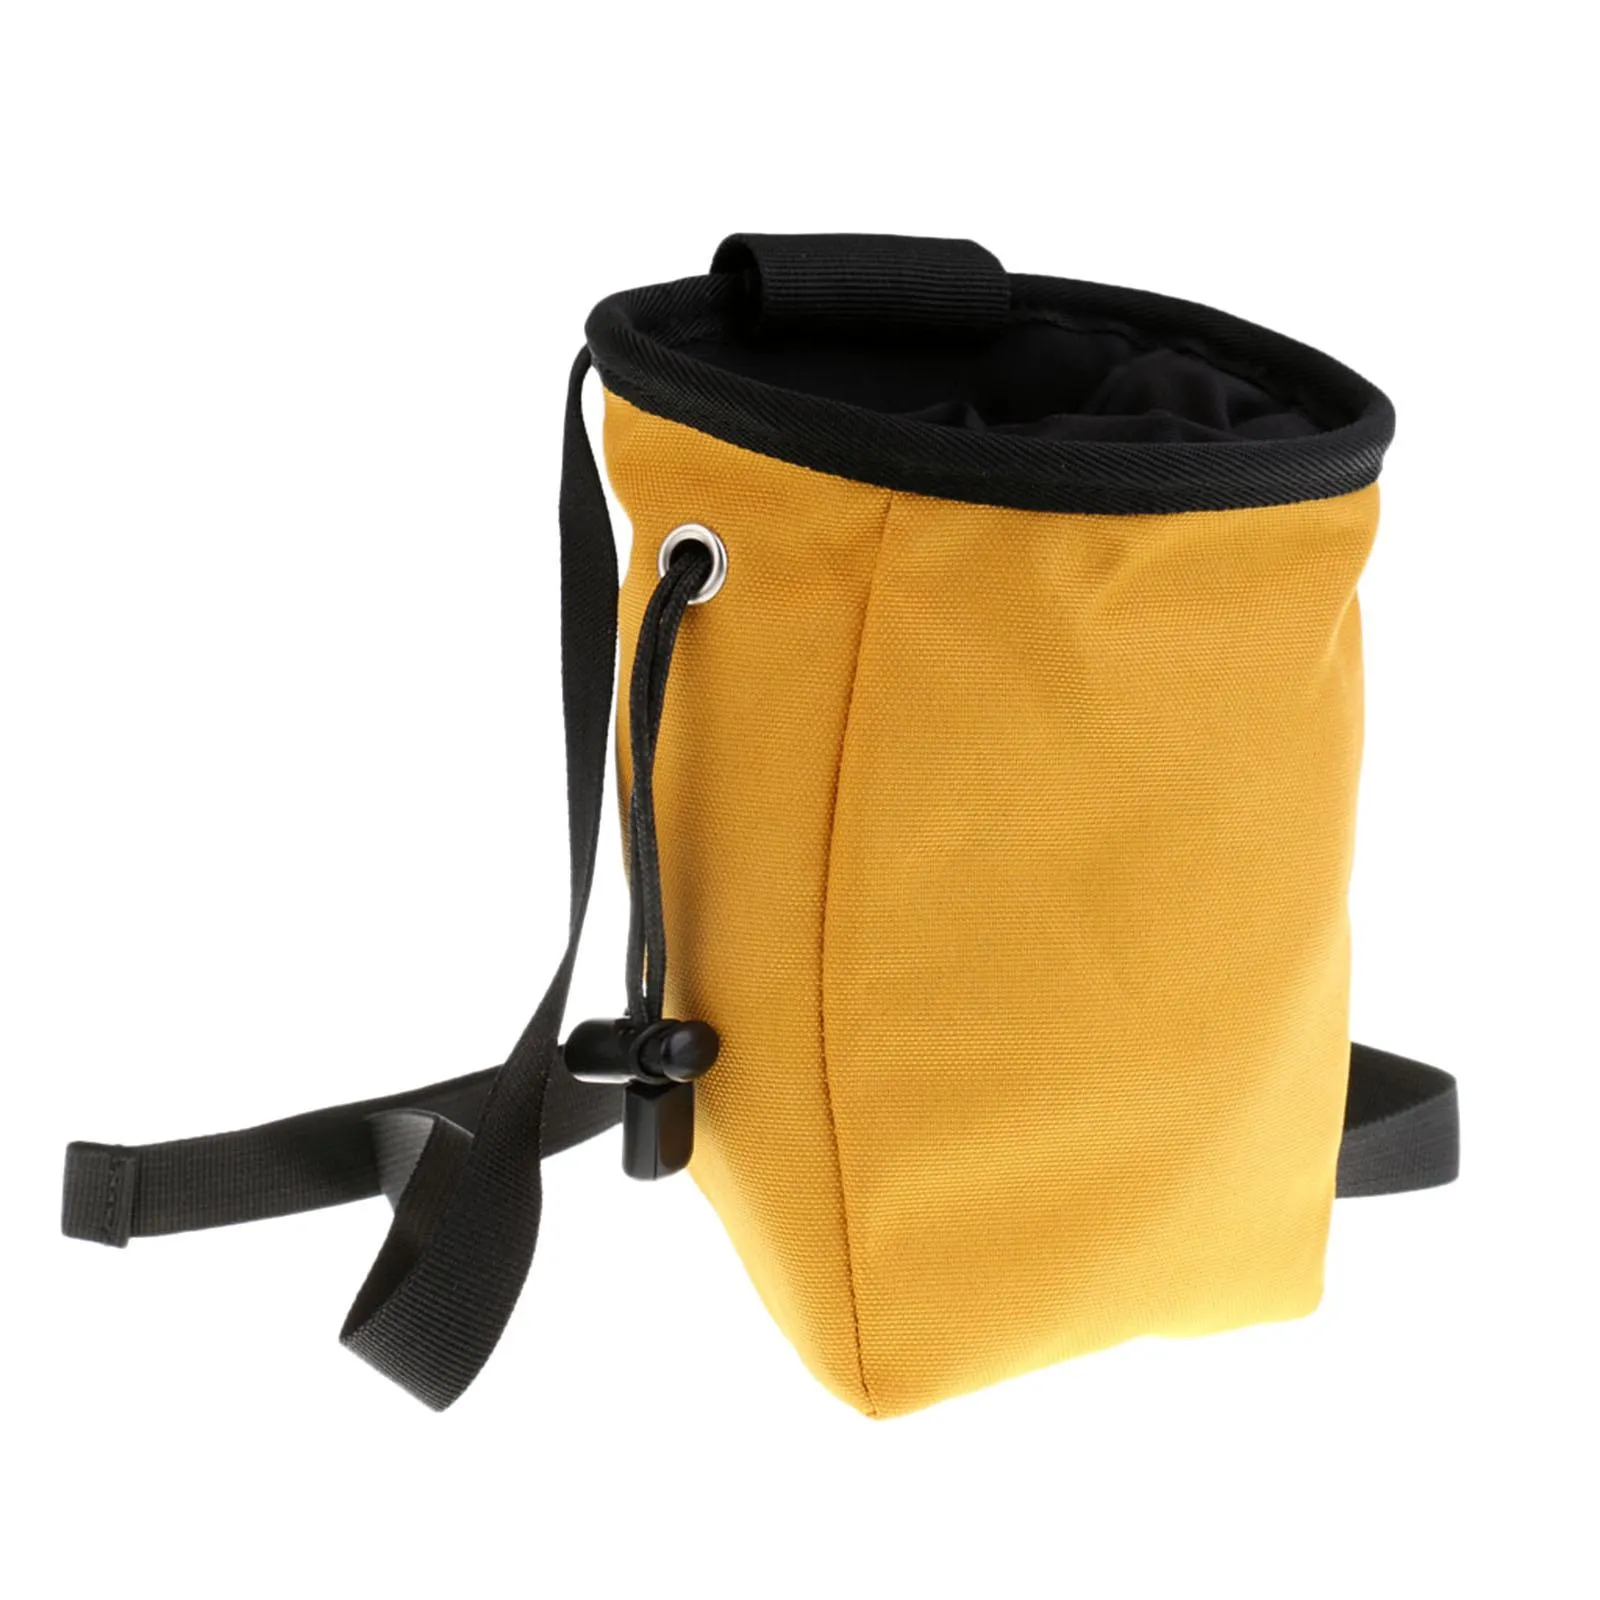  Chalk Bag with Belt and Zippered Pocket for Climbing, Gymnastics, Weight Lifting